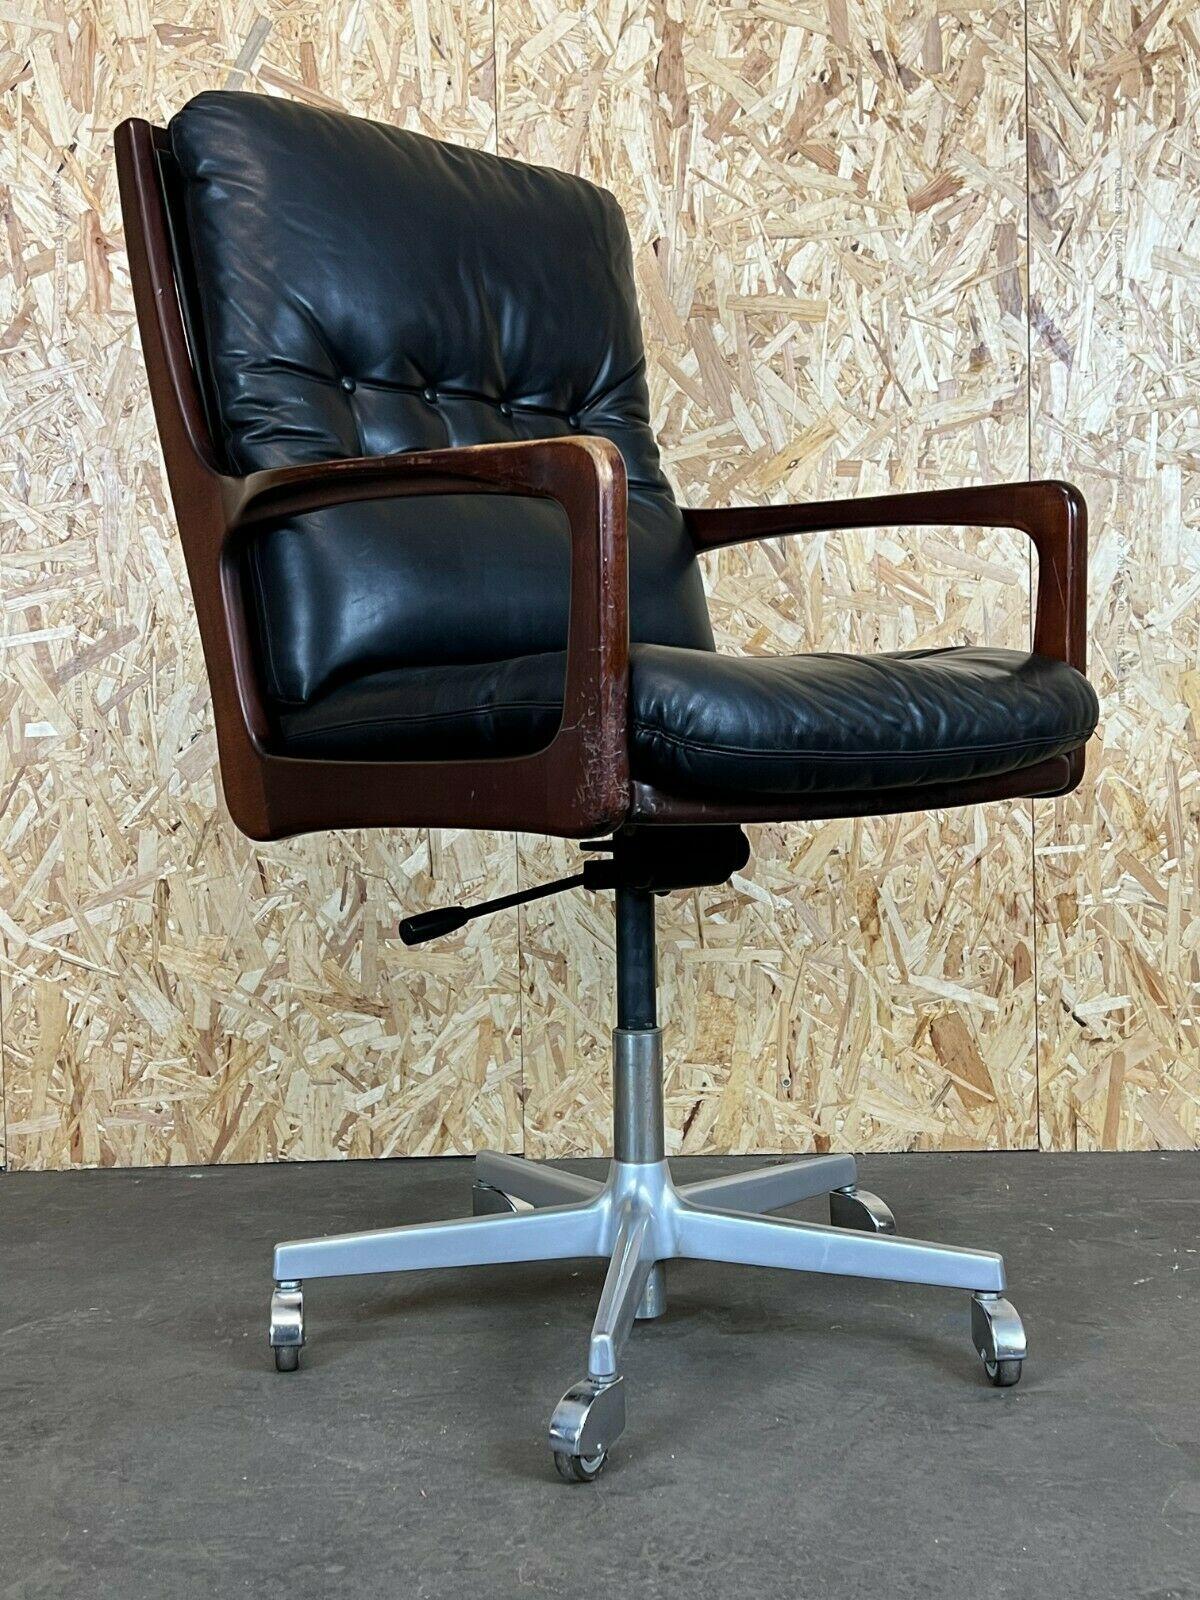 60s 70s Chair Office Chair Eugen Schmidt Solofom Swivel Chair Leather Design 2